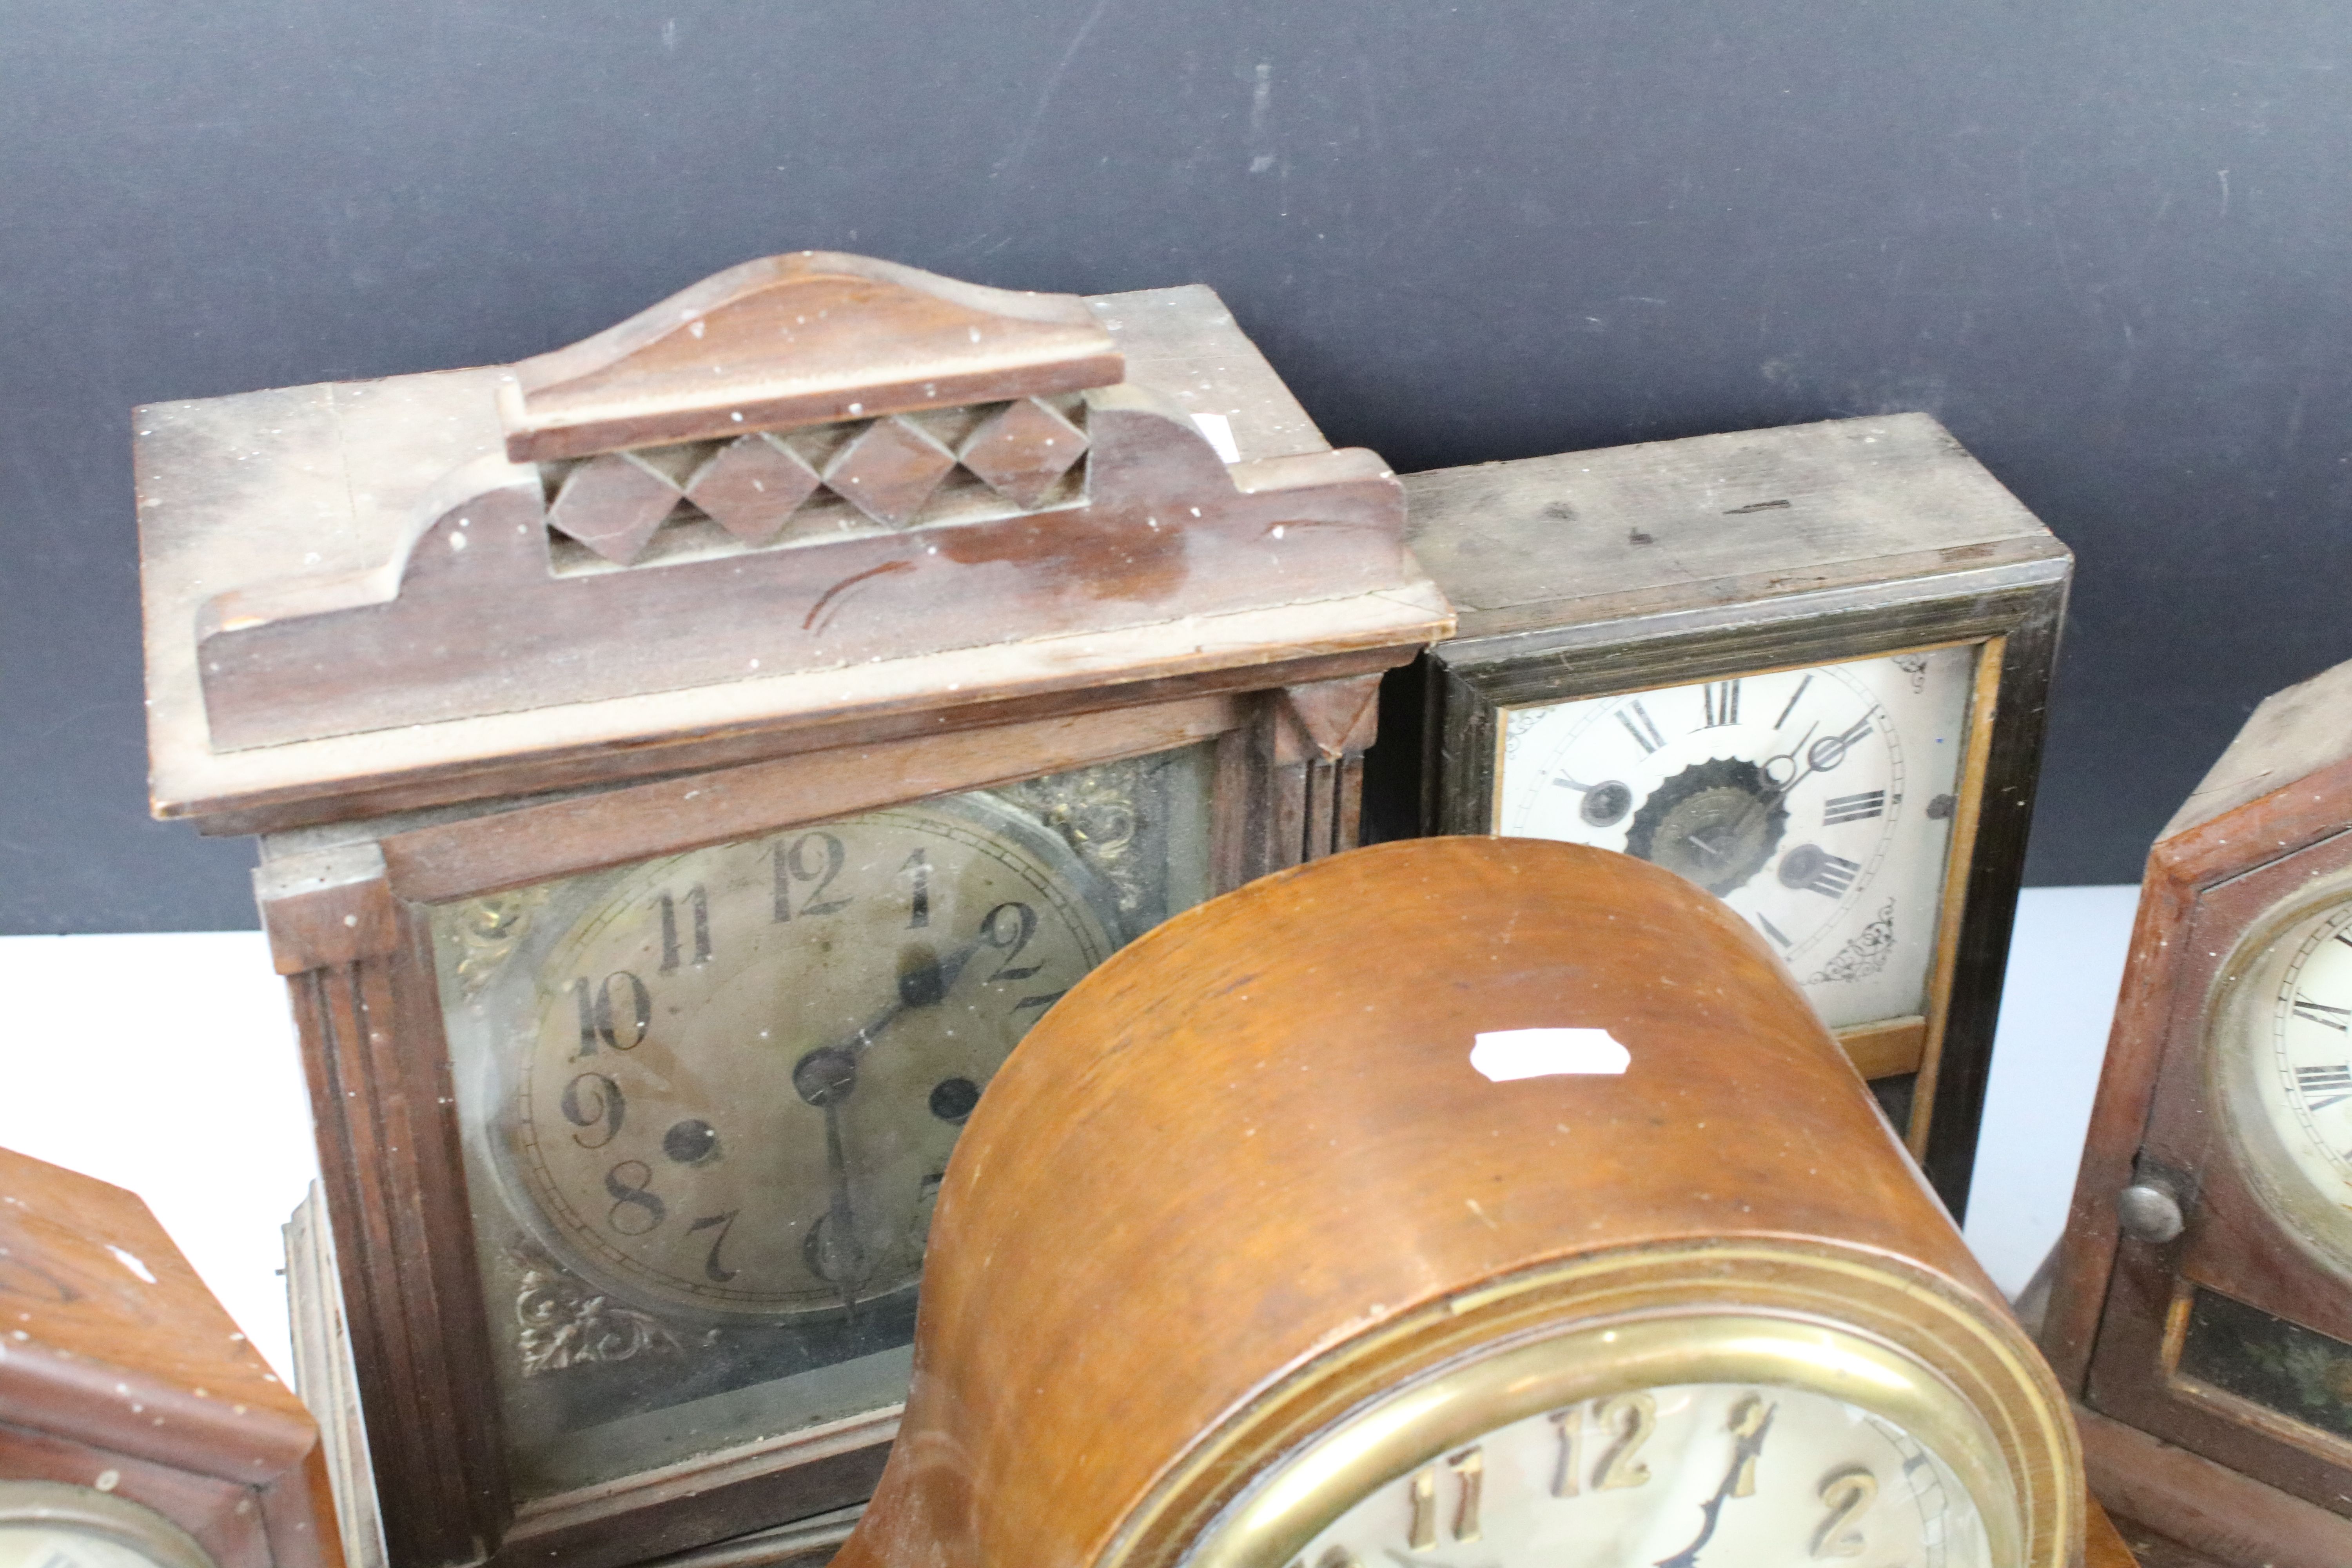 Collection of late 19th / early 20th century wooden mantel clocks and clock parts / movements, - Image 5 of 7